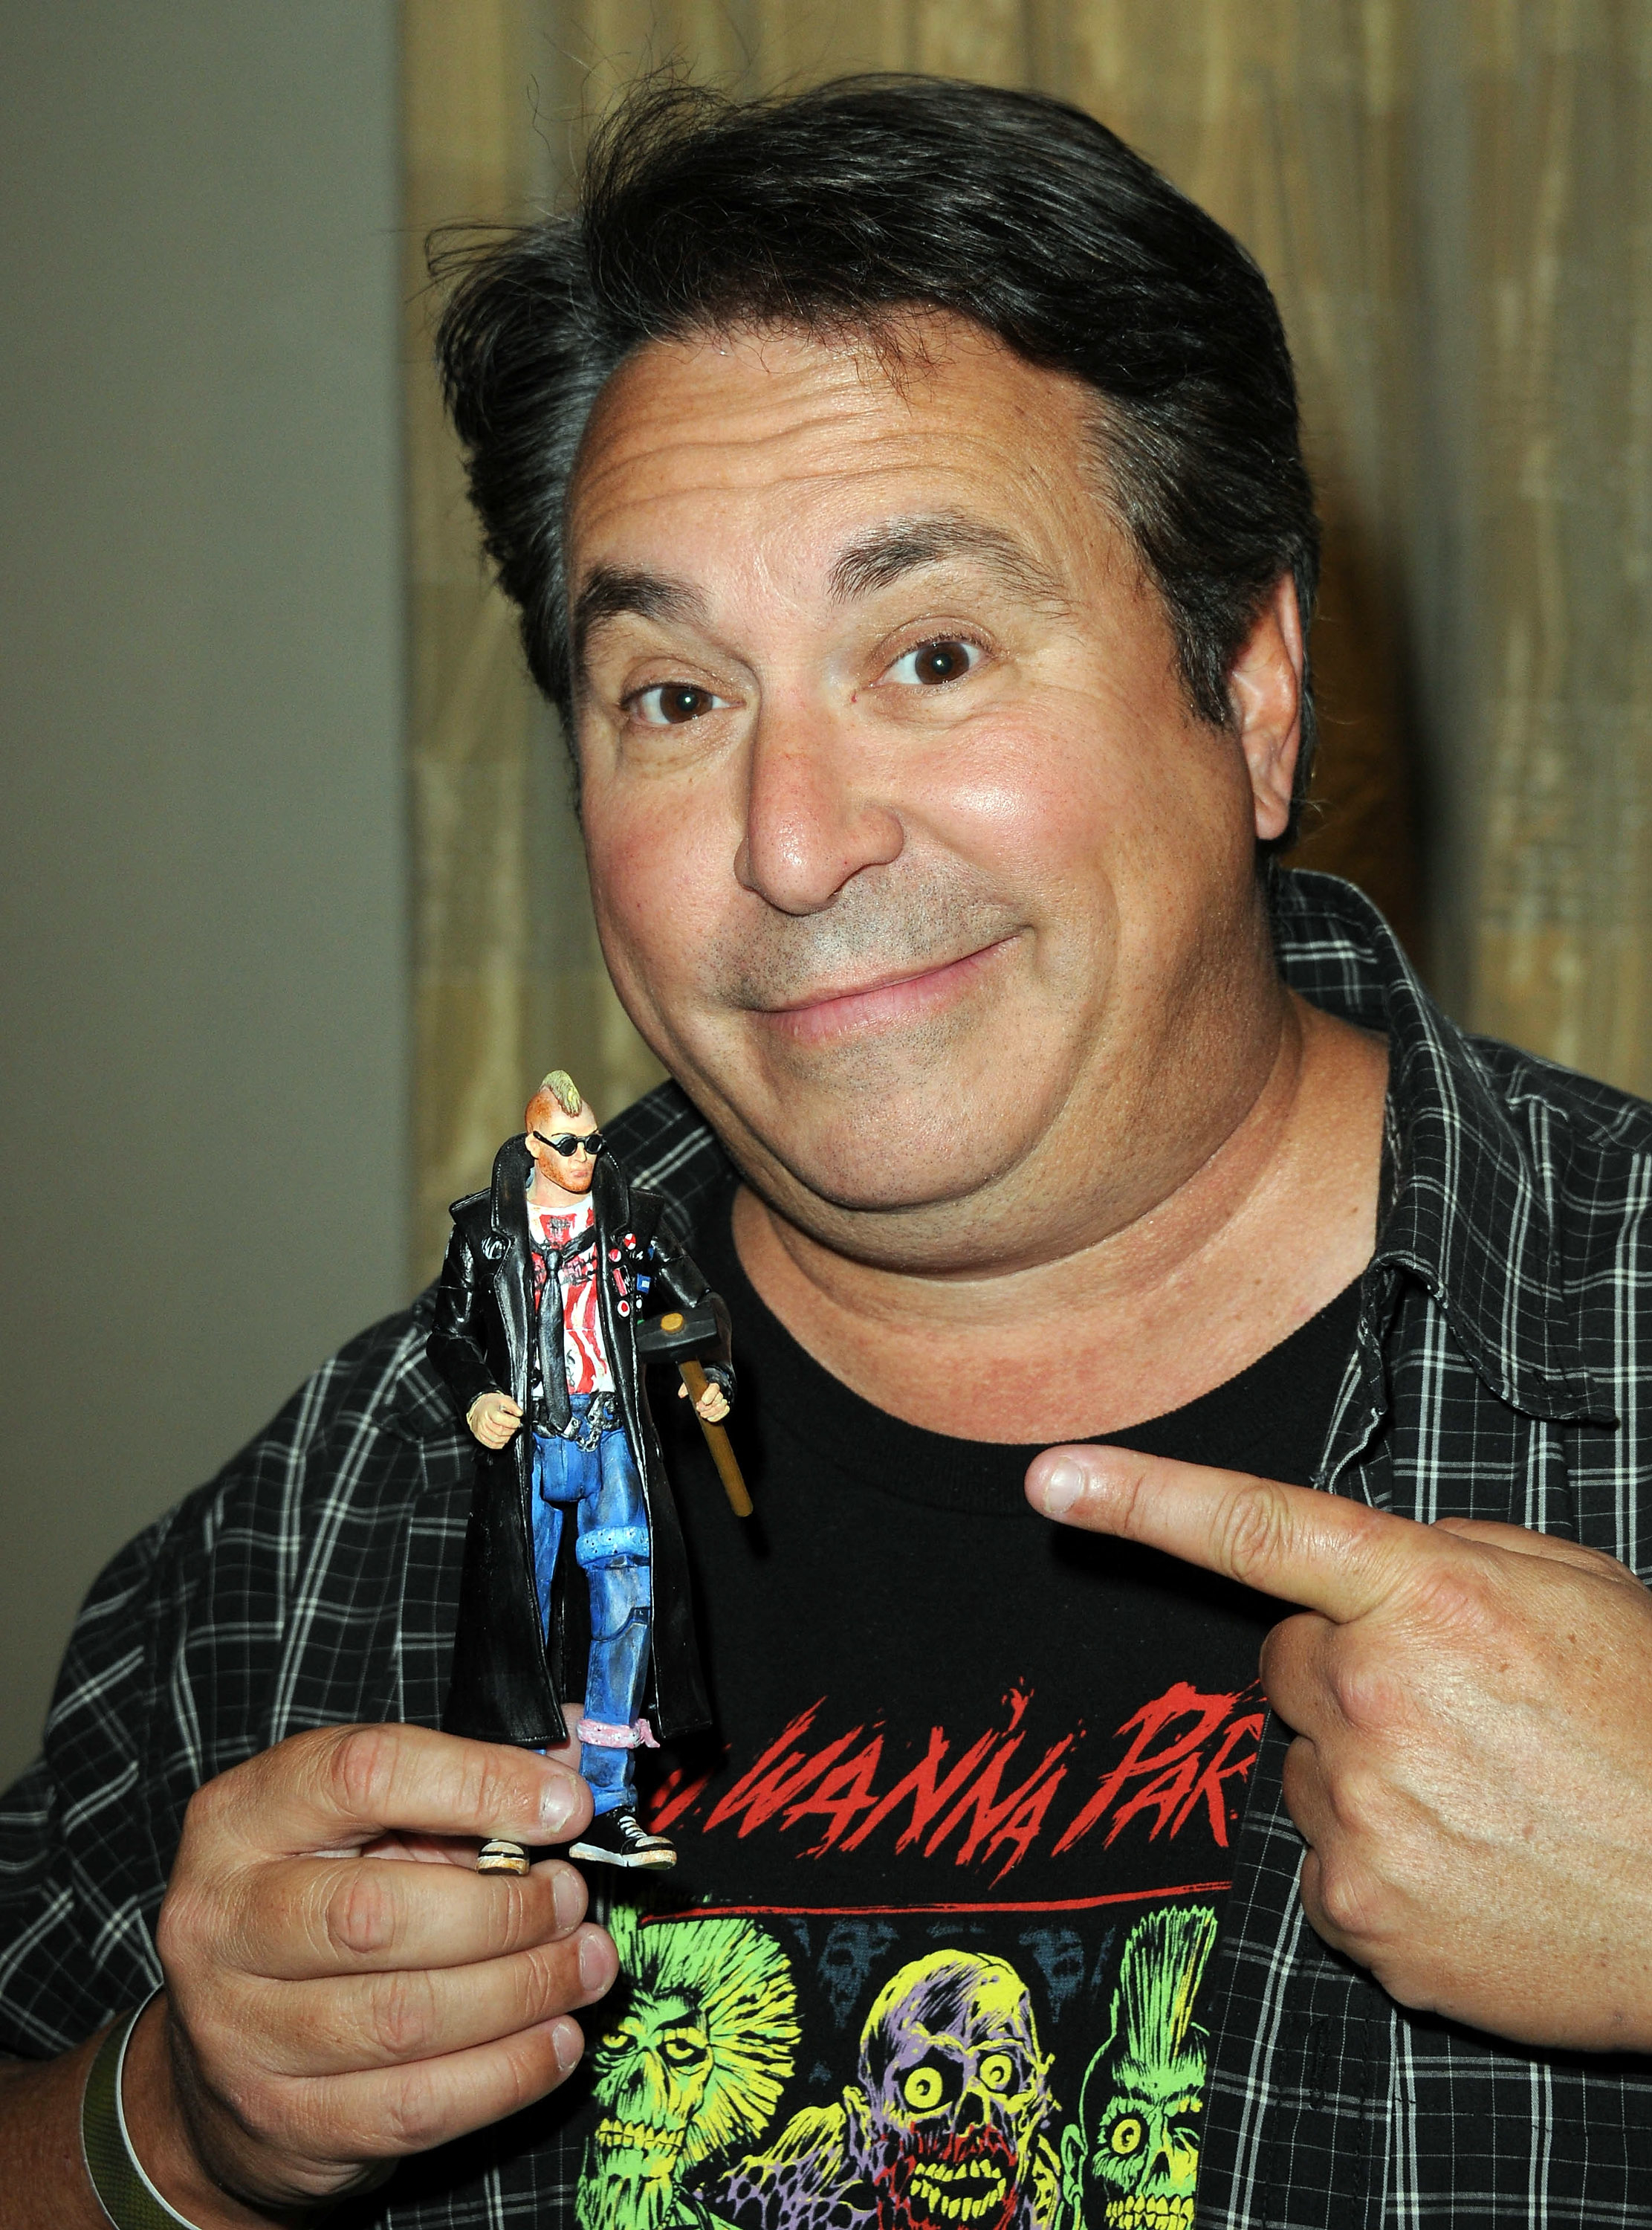 Closeup of Brian Peck holding a toy figurine